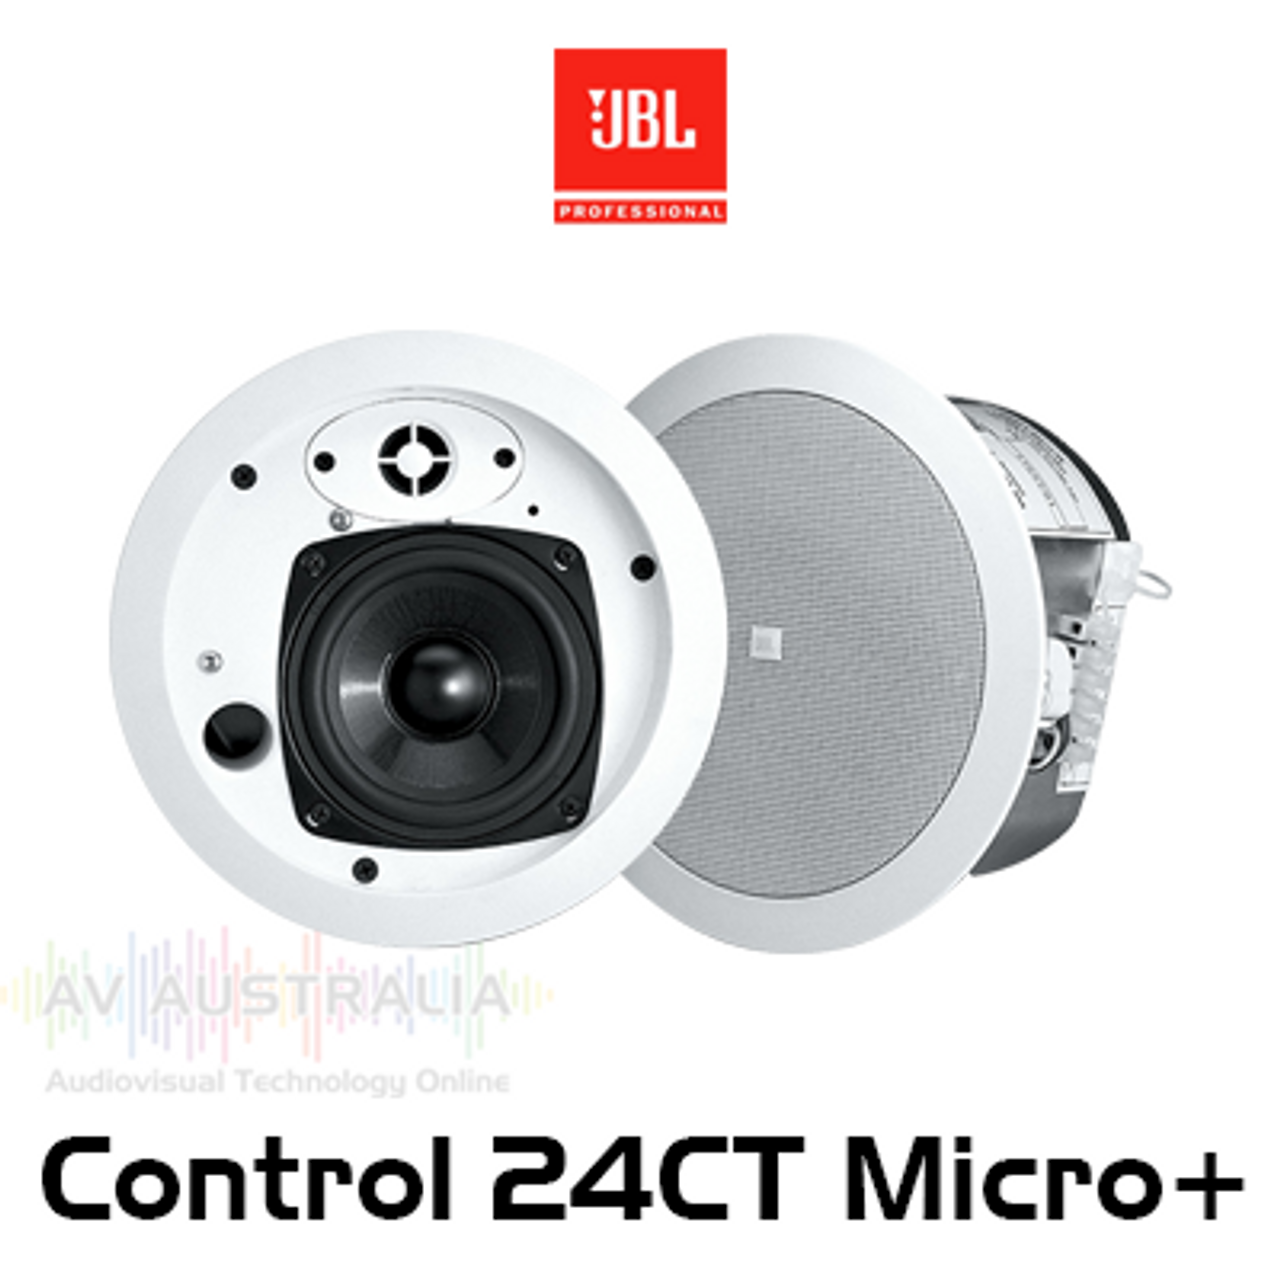 JBL Control 24CT Micro Plus 4.5" 70/100V Shallow Depth Background Music In-Ceiling Loudspeakers (Pair)